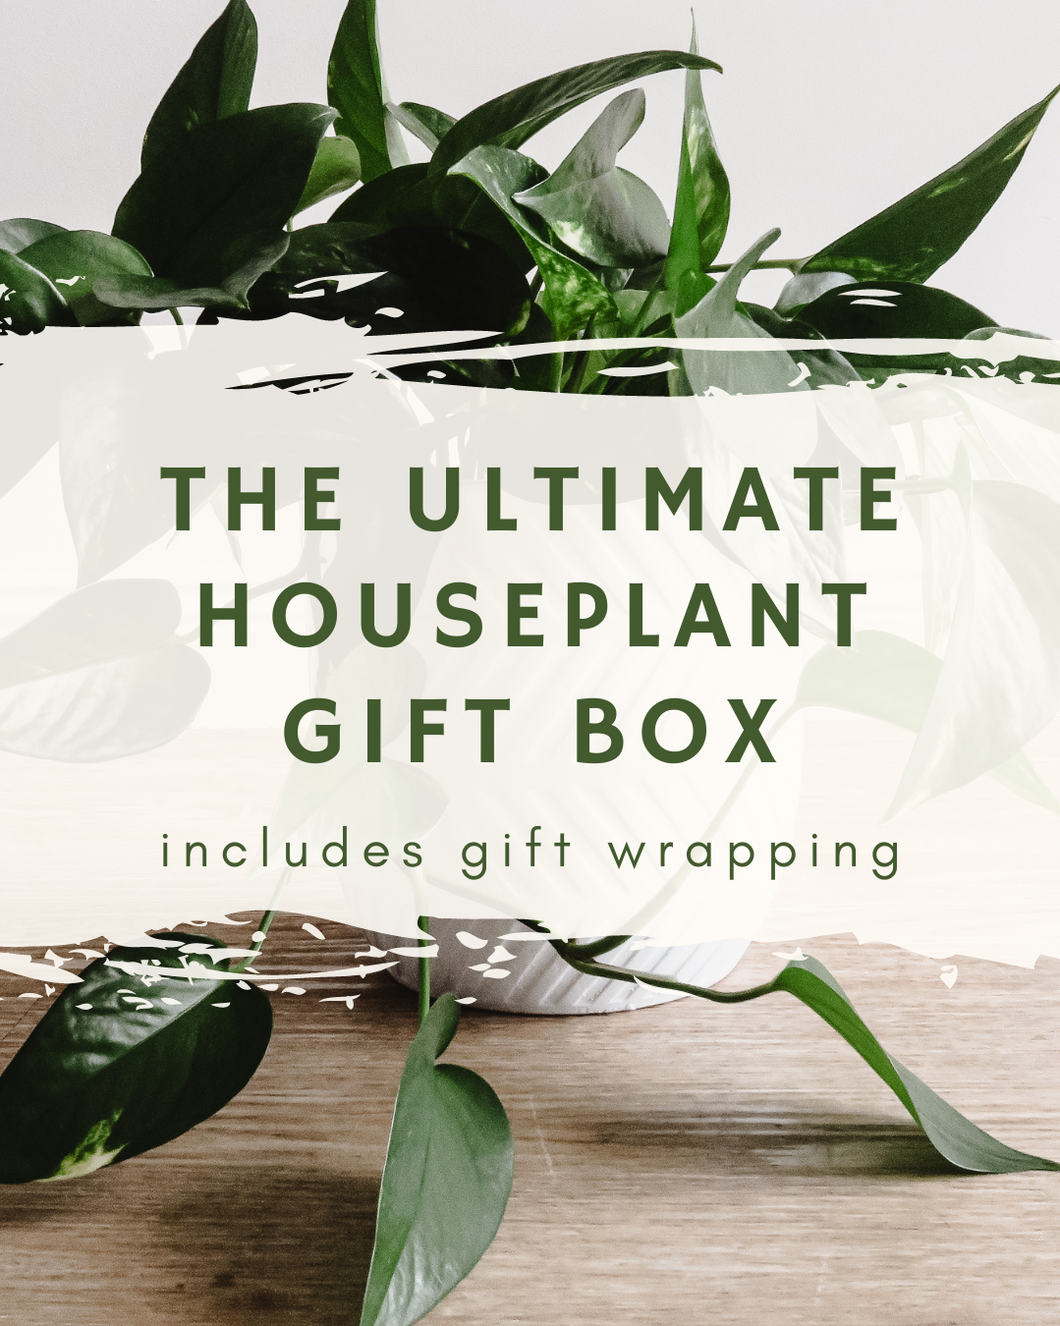 The Ultimate Houseplant Gift Box - includes gift wrapping